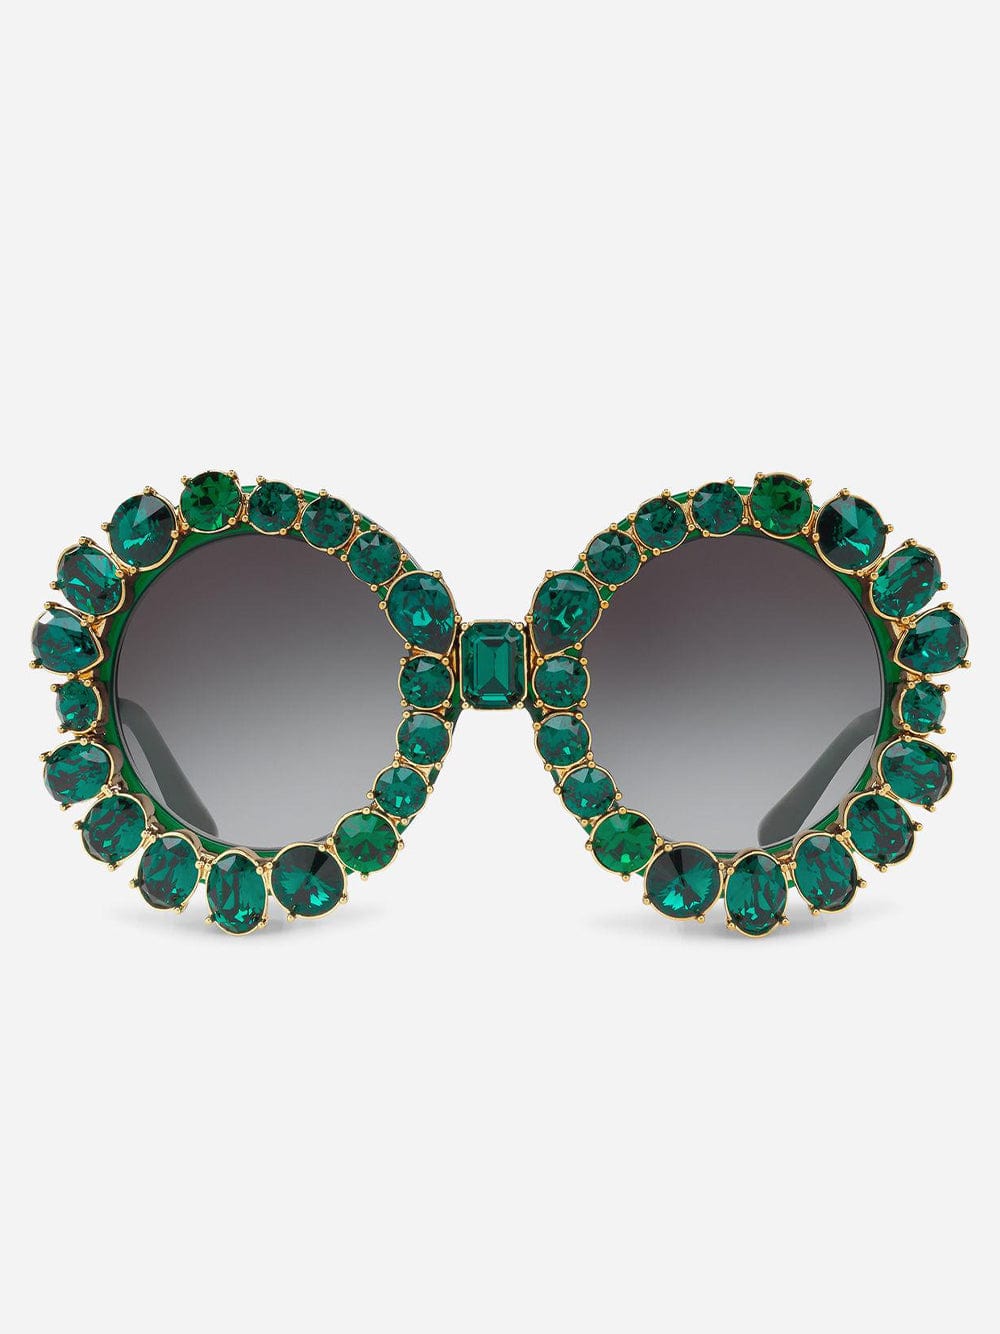 Dolce & Gabbana Round With Colorful Crystals Sunglasses